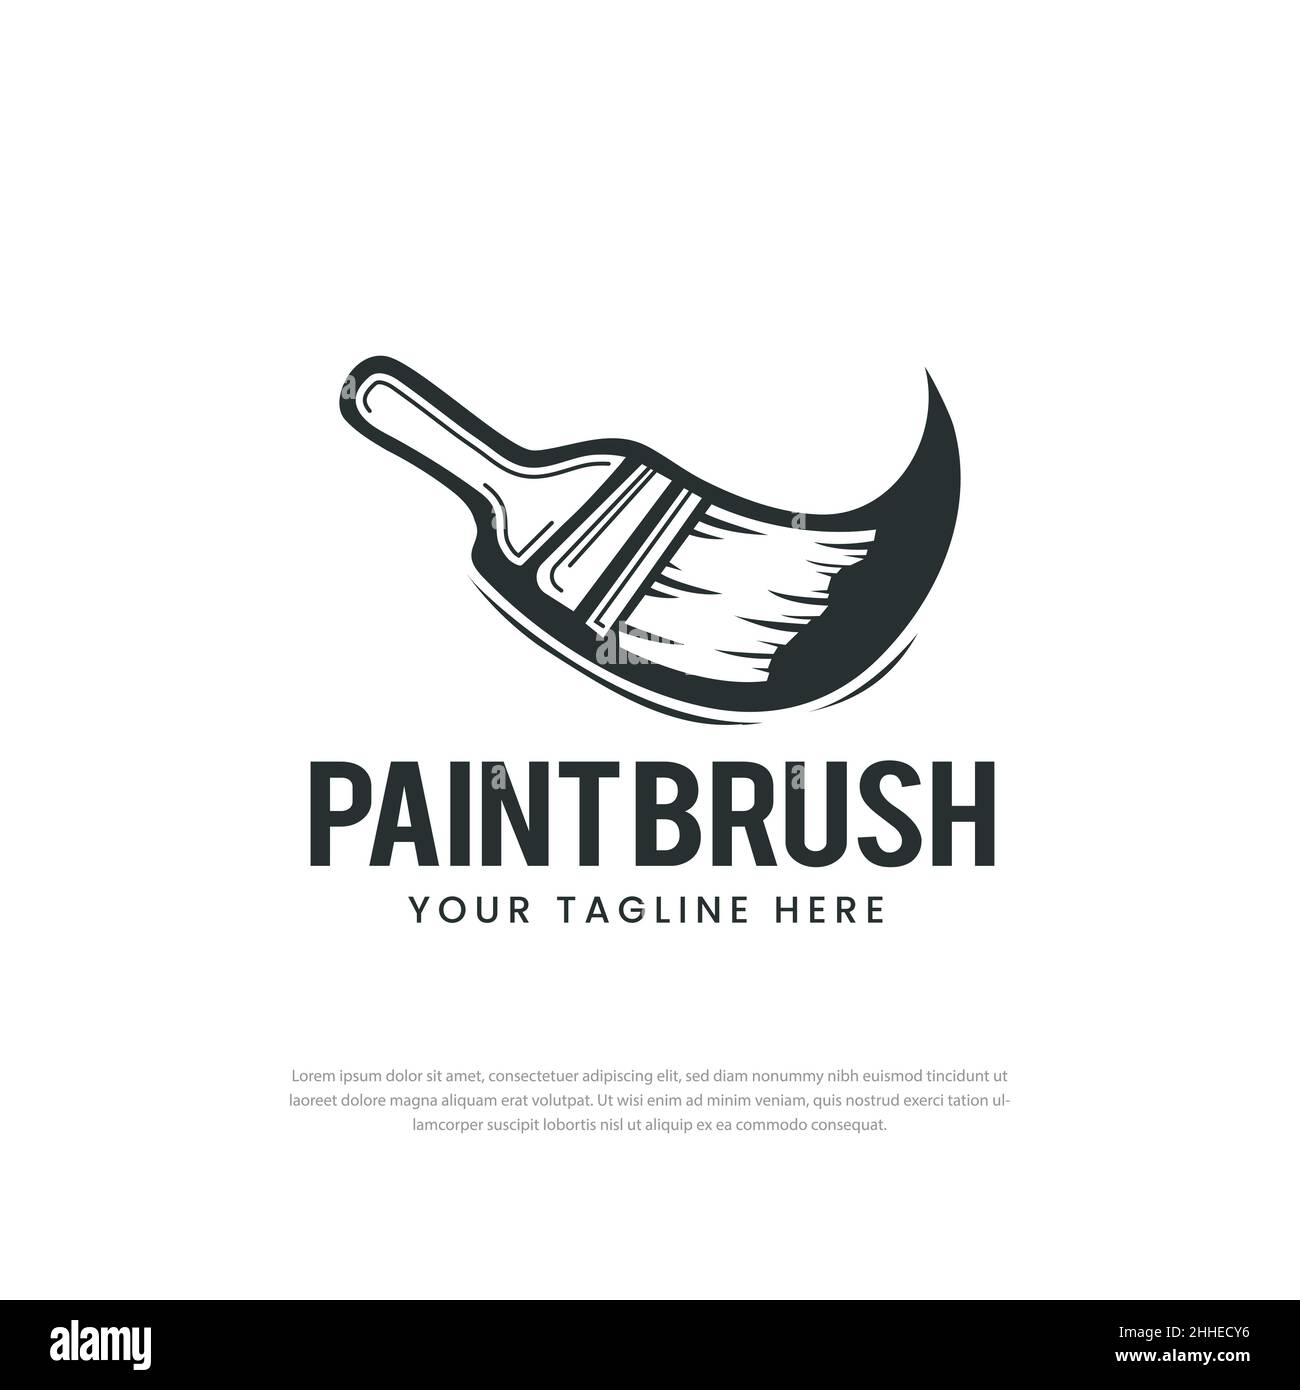 Paint brush design logo, paint business logo concept vector template and decoration Stock Vector